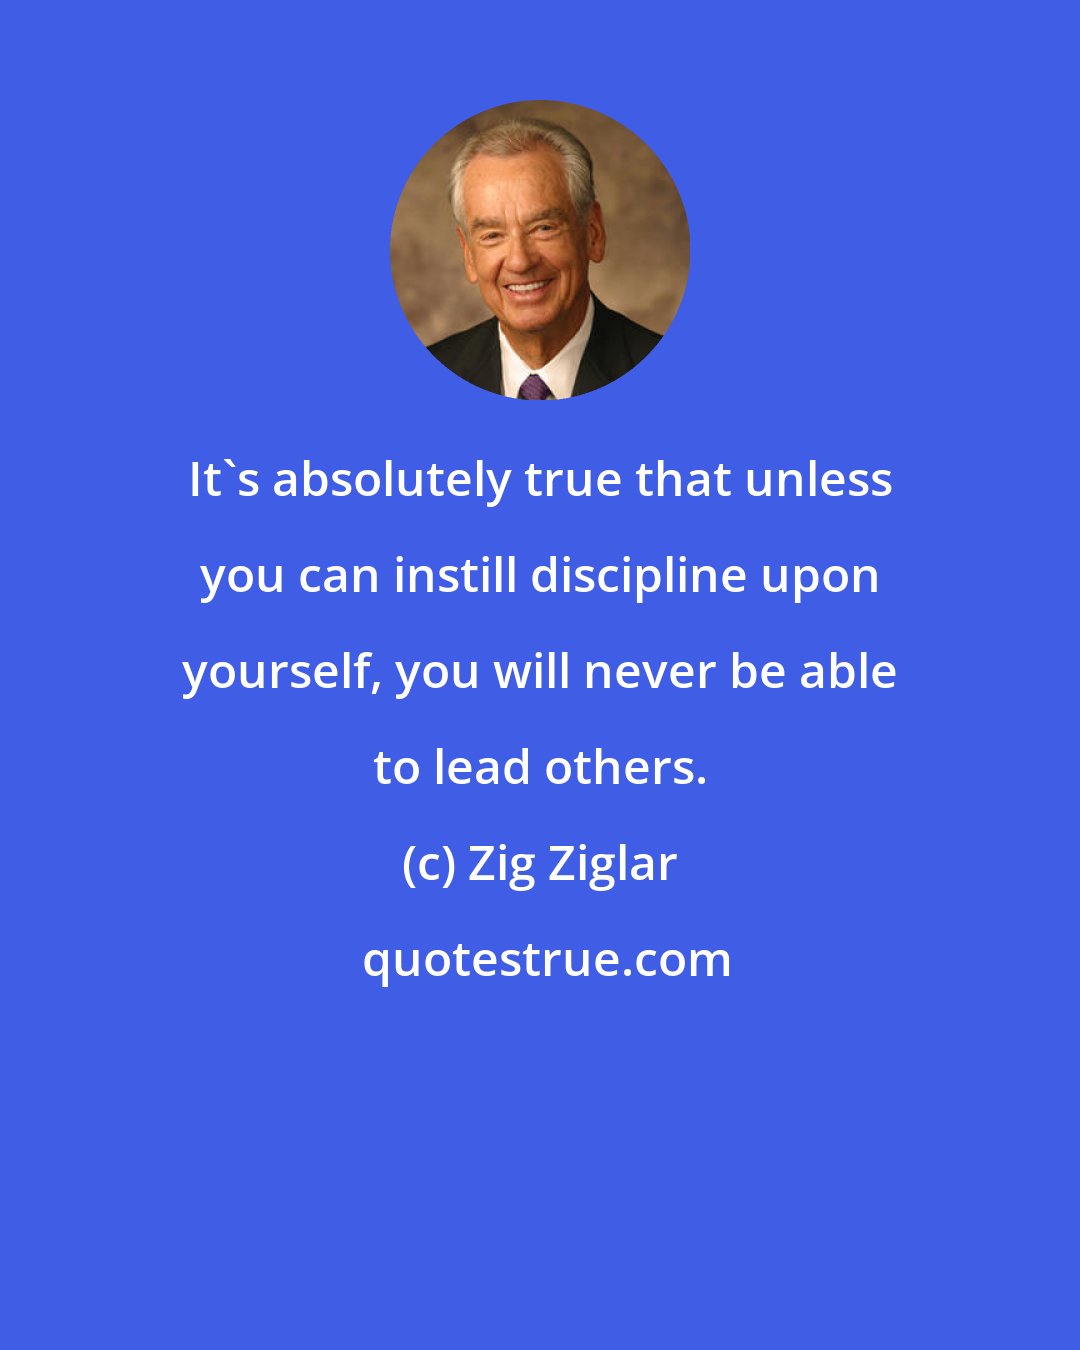 Zig Ziglar: It's absolutely true that unless you can instill discipline upon yourself, you will never be able to lead others.